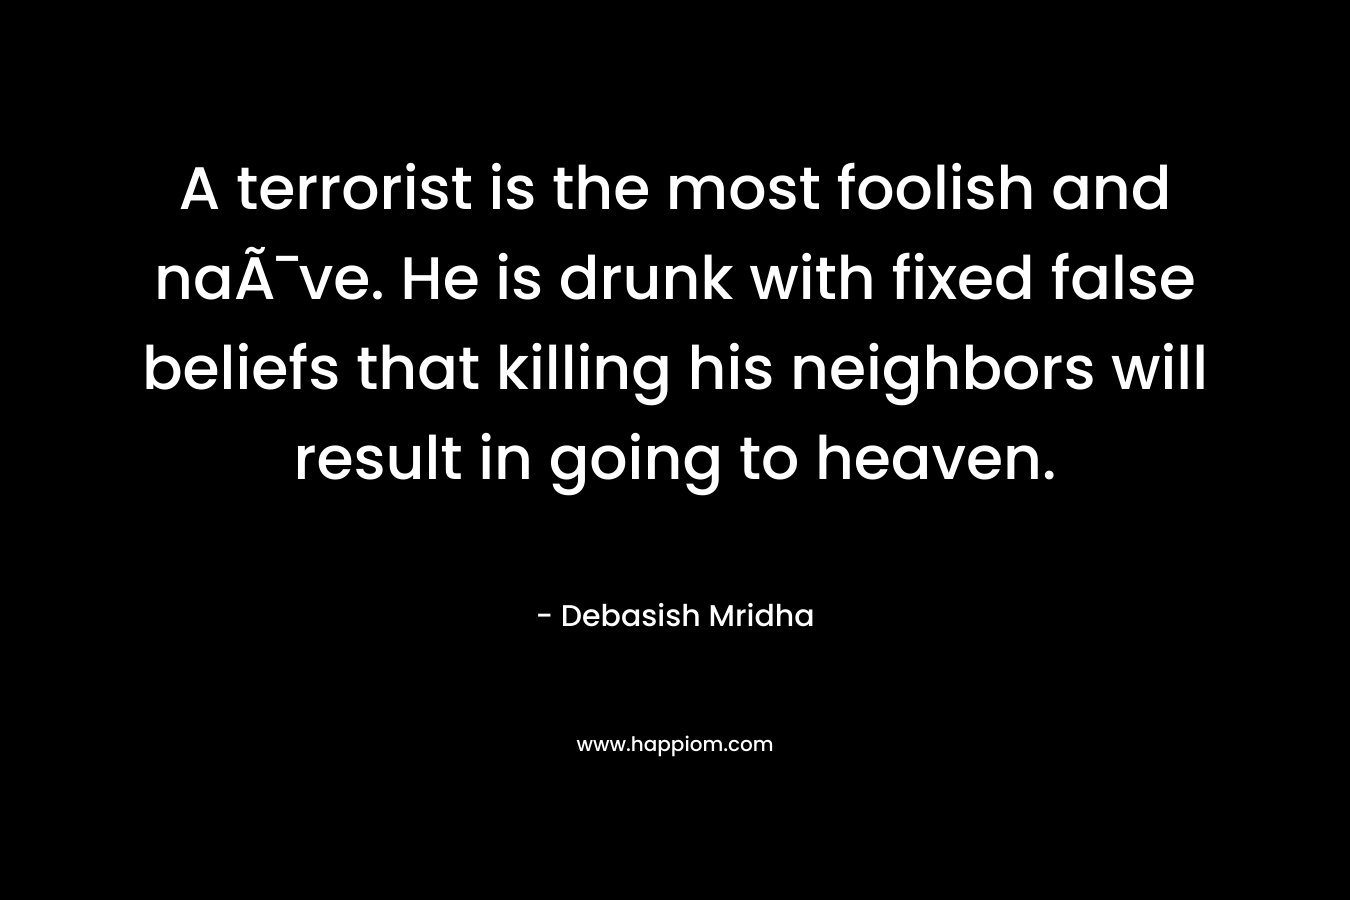 A terrorist is the most foolish and naÃ¯ve. He is drunk with fixed false beliefs that killing his neighbors will result in going to heaven.